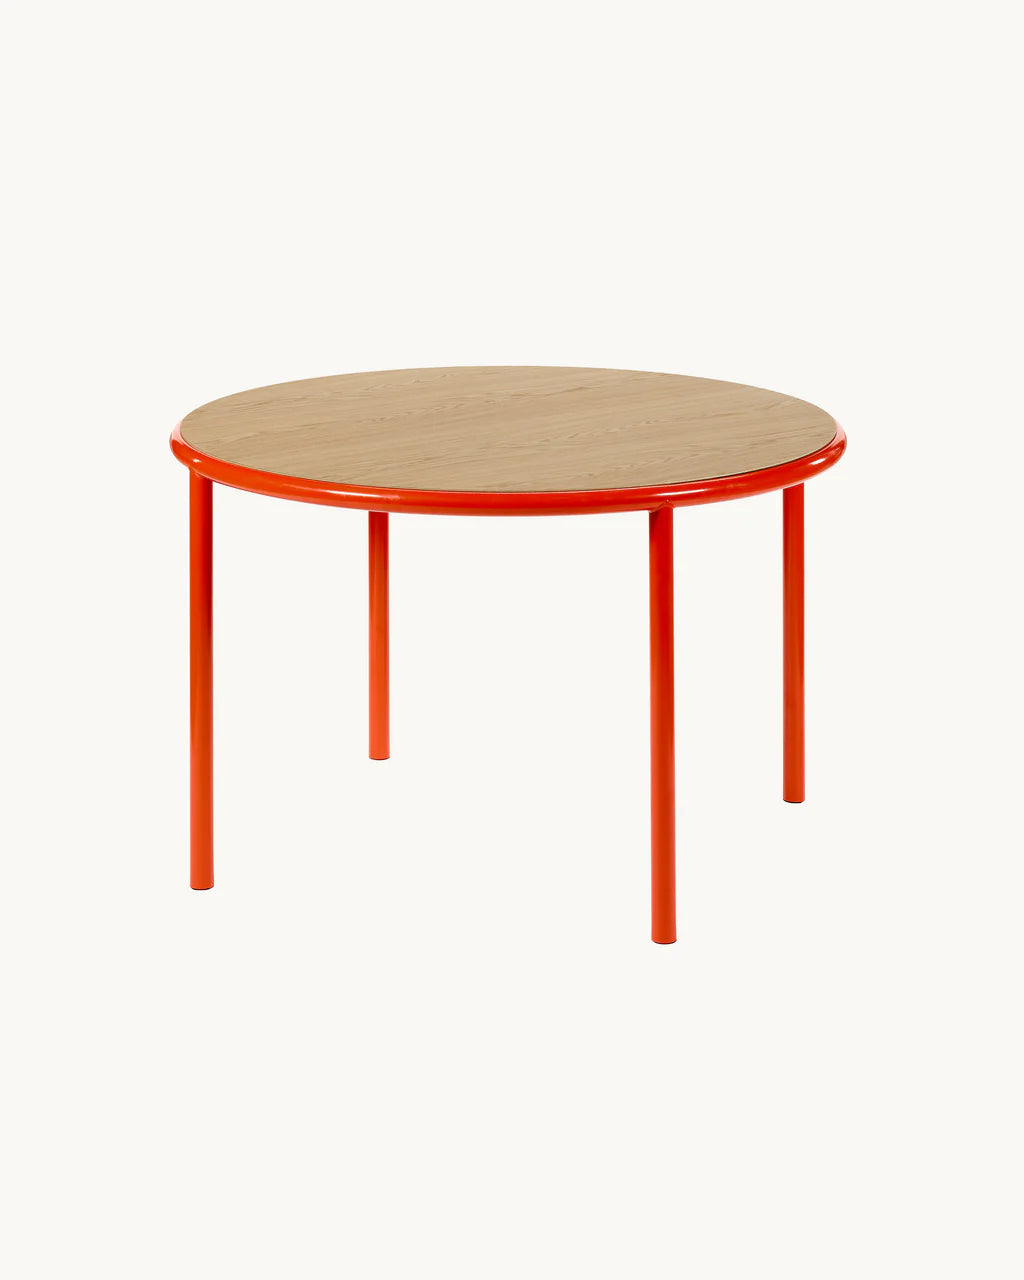 Wooden Table Round M - Valerie Objects